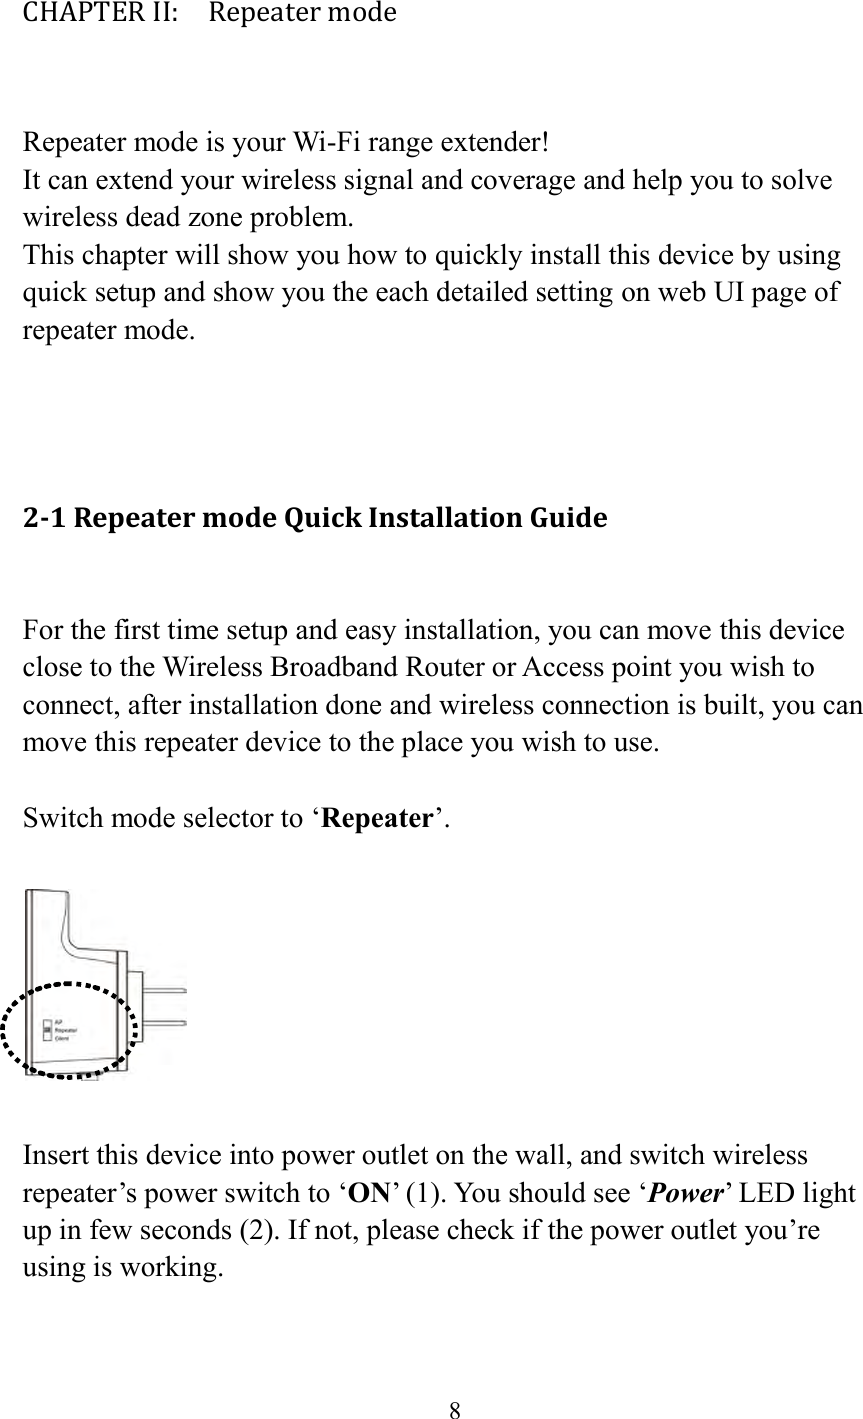  8  CHAPTER II:    Repeater mode  Repeater mode is your Wi-Fi range extender! It can extend your wireless signal and coverage and help you to solve wireless dead zone problem.   This chapter will show you how to quickly install this device by using quick setup and show you the each detailed setting on web UI page of repeater mode.    2-1 Repeater mode Quick Installation Guide  For the first time setup and easy installation, you can move this device close to the Wireless Broadband Router or Access point you wish to connect, after installation done and wireless connection is built, you can move this repeater device to the place you wish to use.  Switch mode selector to ‘Repeater’.    Insert this device into power outlet on the wall, and switch wireless repeater’s power switch to ‘ON’ (1). You should see ‘Power’ LED light up in few seconds (2). If not, please check if the power outlet you’re using is working.  